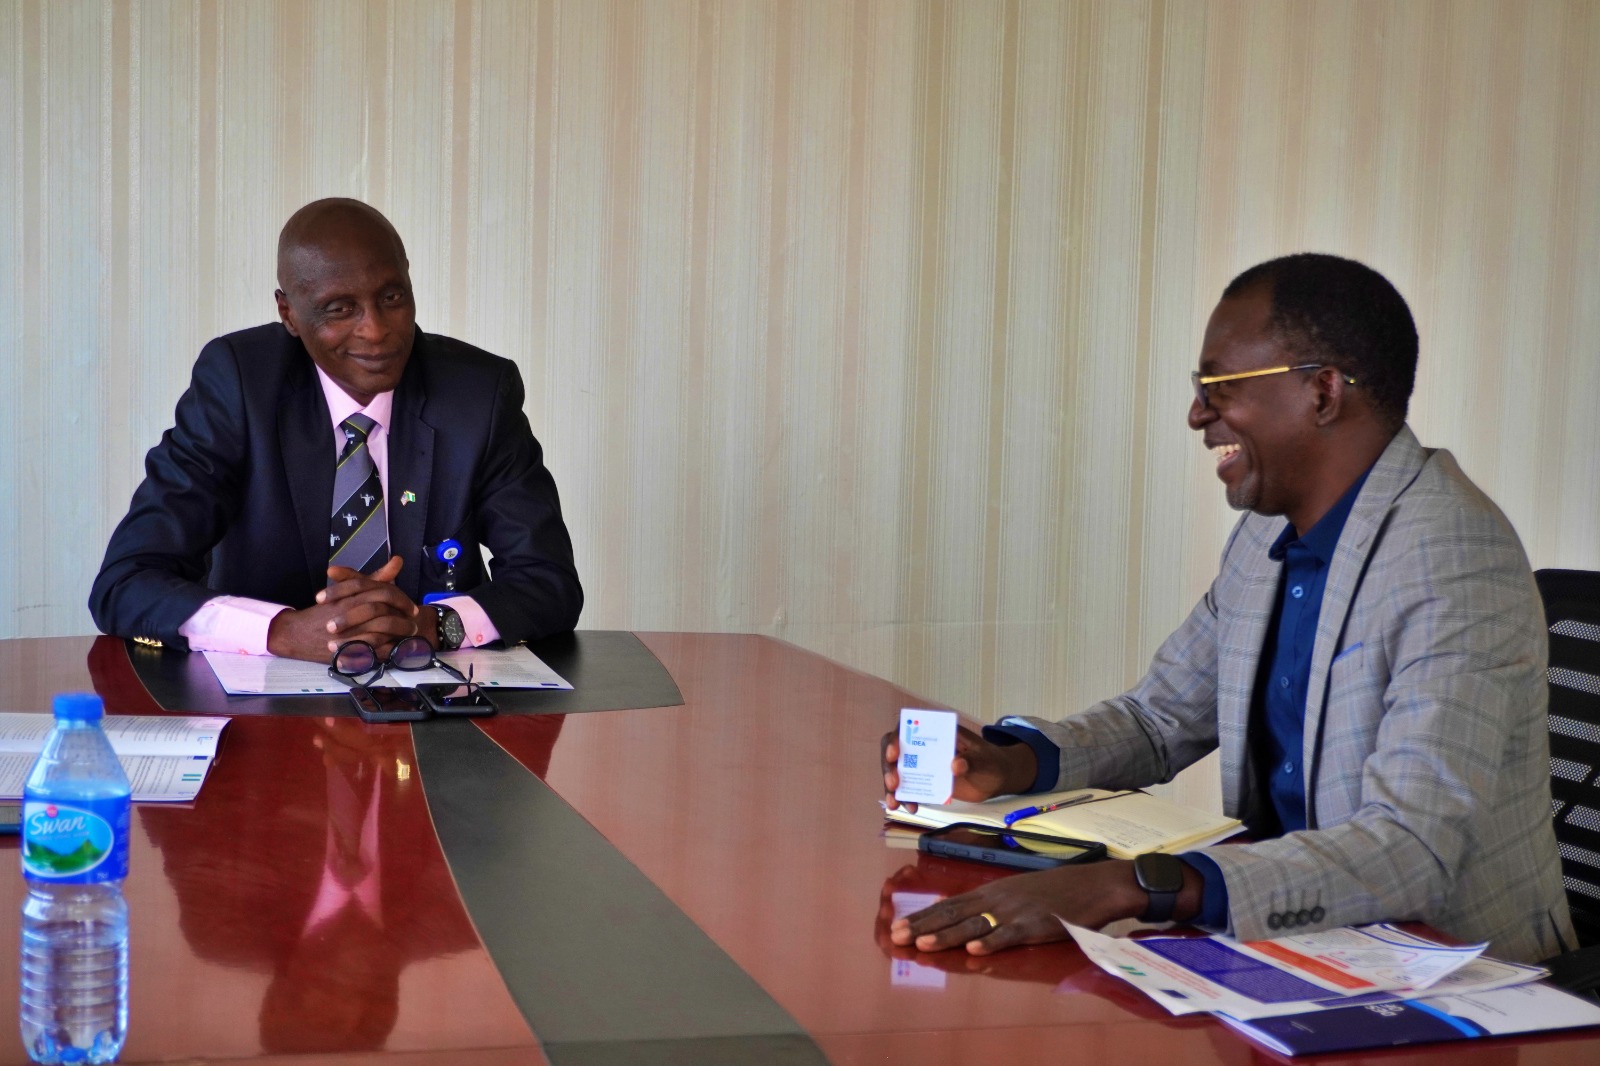 Mr Danladi Plang and the Attorney General of Plateau State Barr Philemon Dafi during a courtesy visit to the State Ministry of Justice